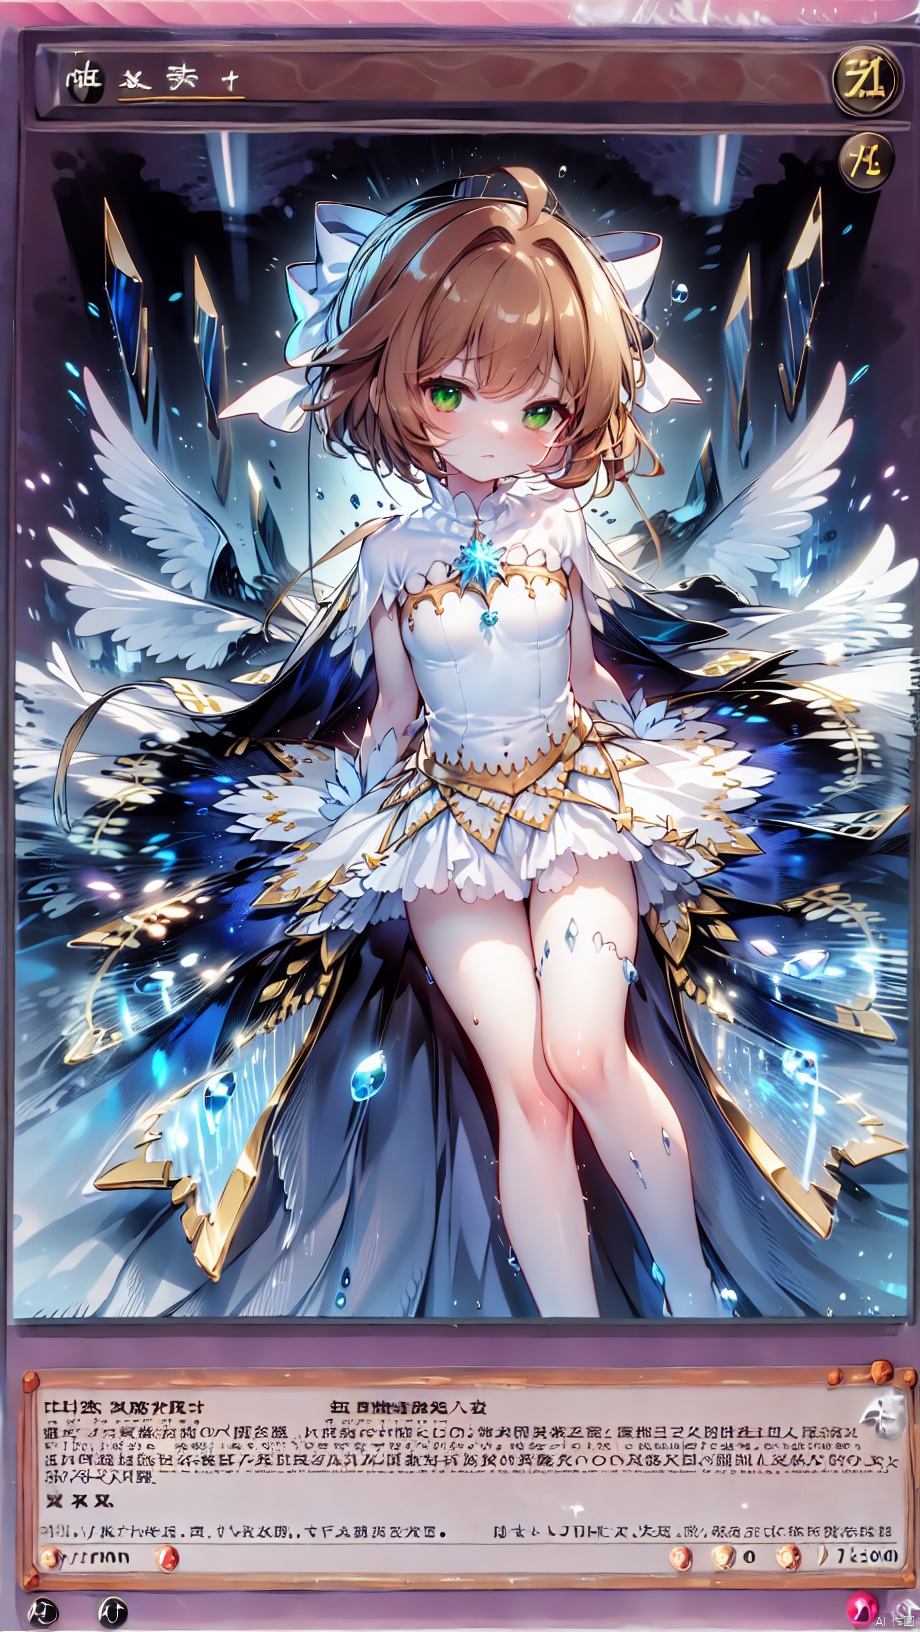  card background,kinomoto sakura,magical girl,loli,beautiful detailed girl,narrow waist,very small breasts,Glowing skin,Delicate cute face,glowing wings,transparent wings,nude,torn clothes,broken clothes,transparent clothes,green eyes,beautiful detailed eyes,glowing eyes,(half-closed eyes),((brown hair)),((short hair,wing hair)),red hair bow,ahoge,Glowing hair,Extremely delicate hair,Thin leg,white legwear garter,beautiful detailed fingers,Slender fingers,steepled fingers,Shiny nails,(lying,on bed,spread leg,separated legs),(lying,spread leg,separated legs),tearful(expression),teardrop on the face,Tears on the chin,open mouth,wavy mouth,mouth drool,screaming,heavy breathing,beautiful detailed mouth,looking at viewer,semen in the mouth,semen on the hair,semen on the face,too many semen on the breasts,too many semen dripping from the body,blood on between legs,semen(ornament),bedroom,ornate bed,hyper realistic,magic,8k,incredible quality,best quality,masterpiece,highly detailed,extremely detailed CG,cinematic lighting,backlighting,full body,high definition,detail enhancement,(perfect hands, perfect anatomy),detail enhancement